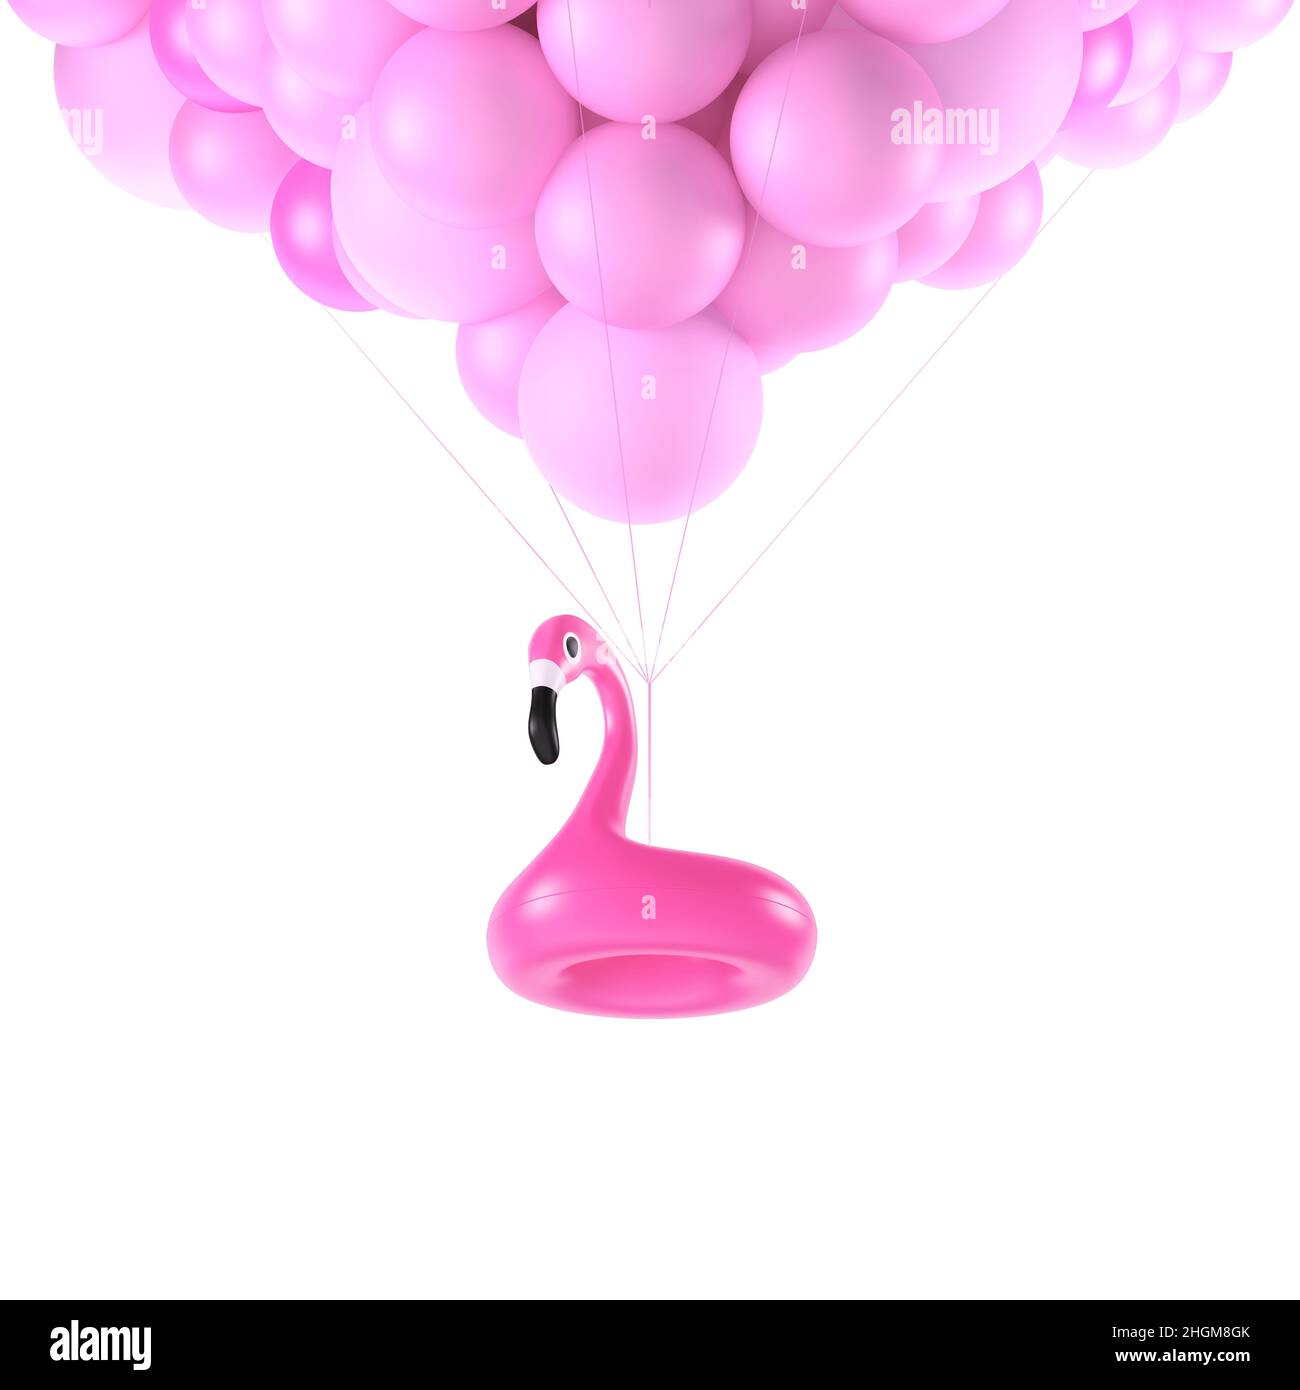 Pink inflatable flamingo pulled by balloons, illustration Stock Photo